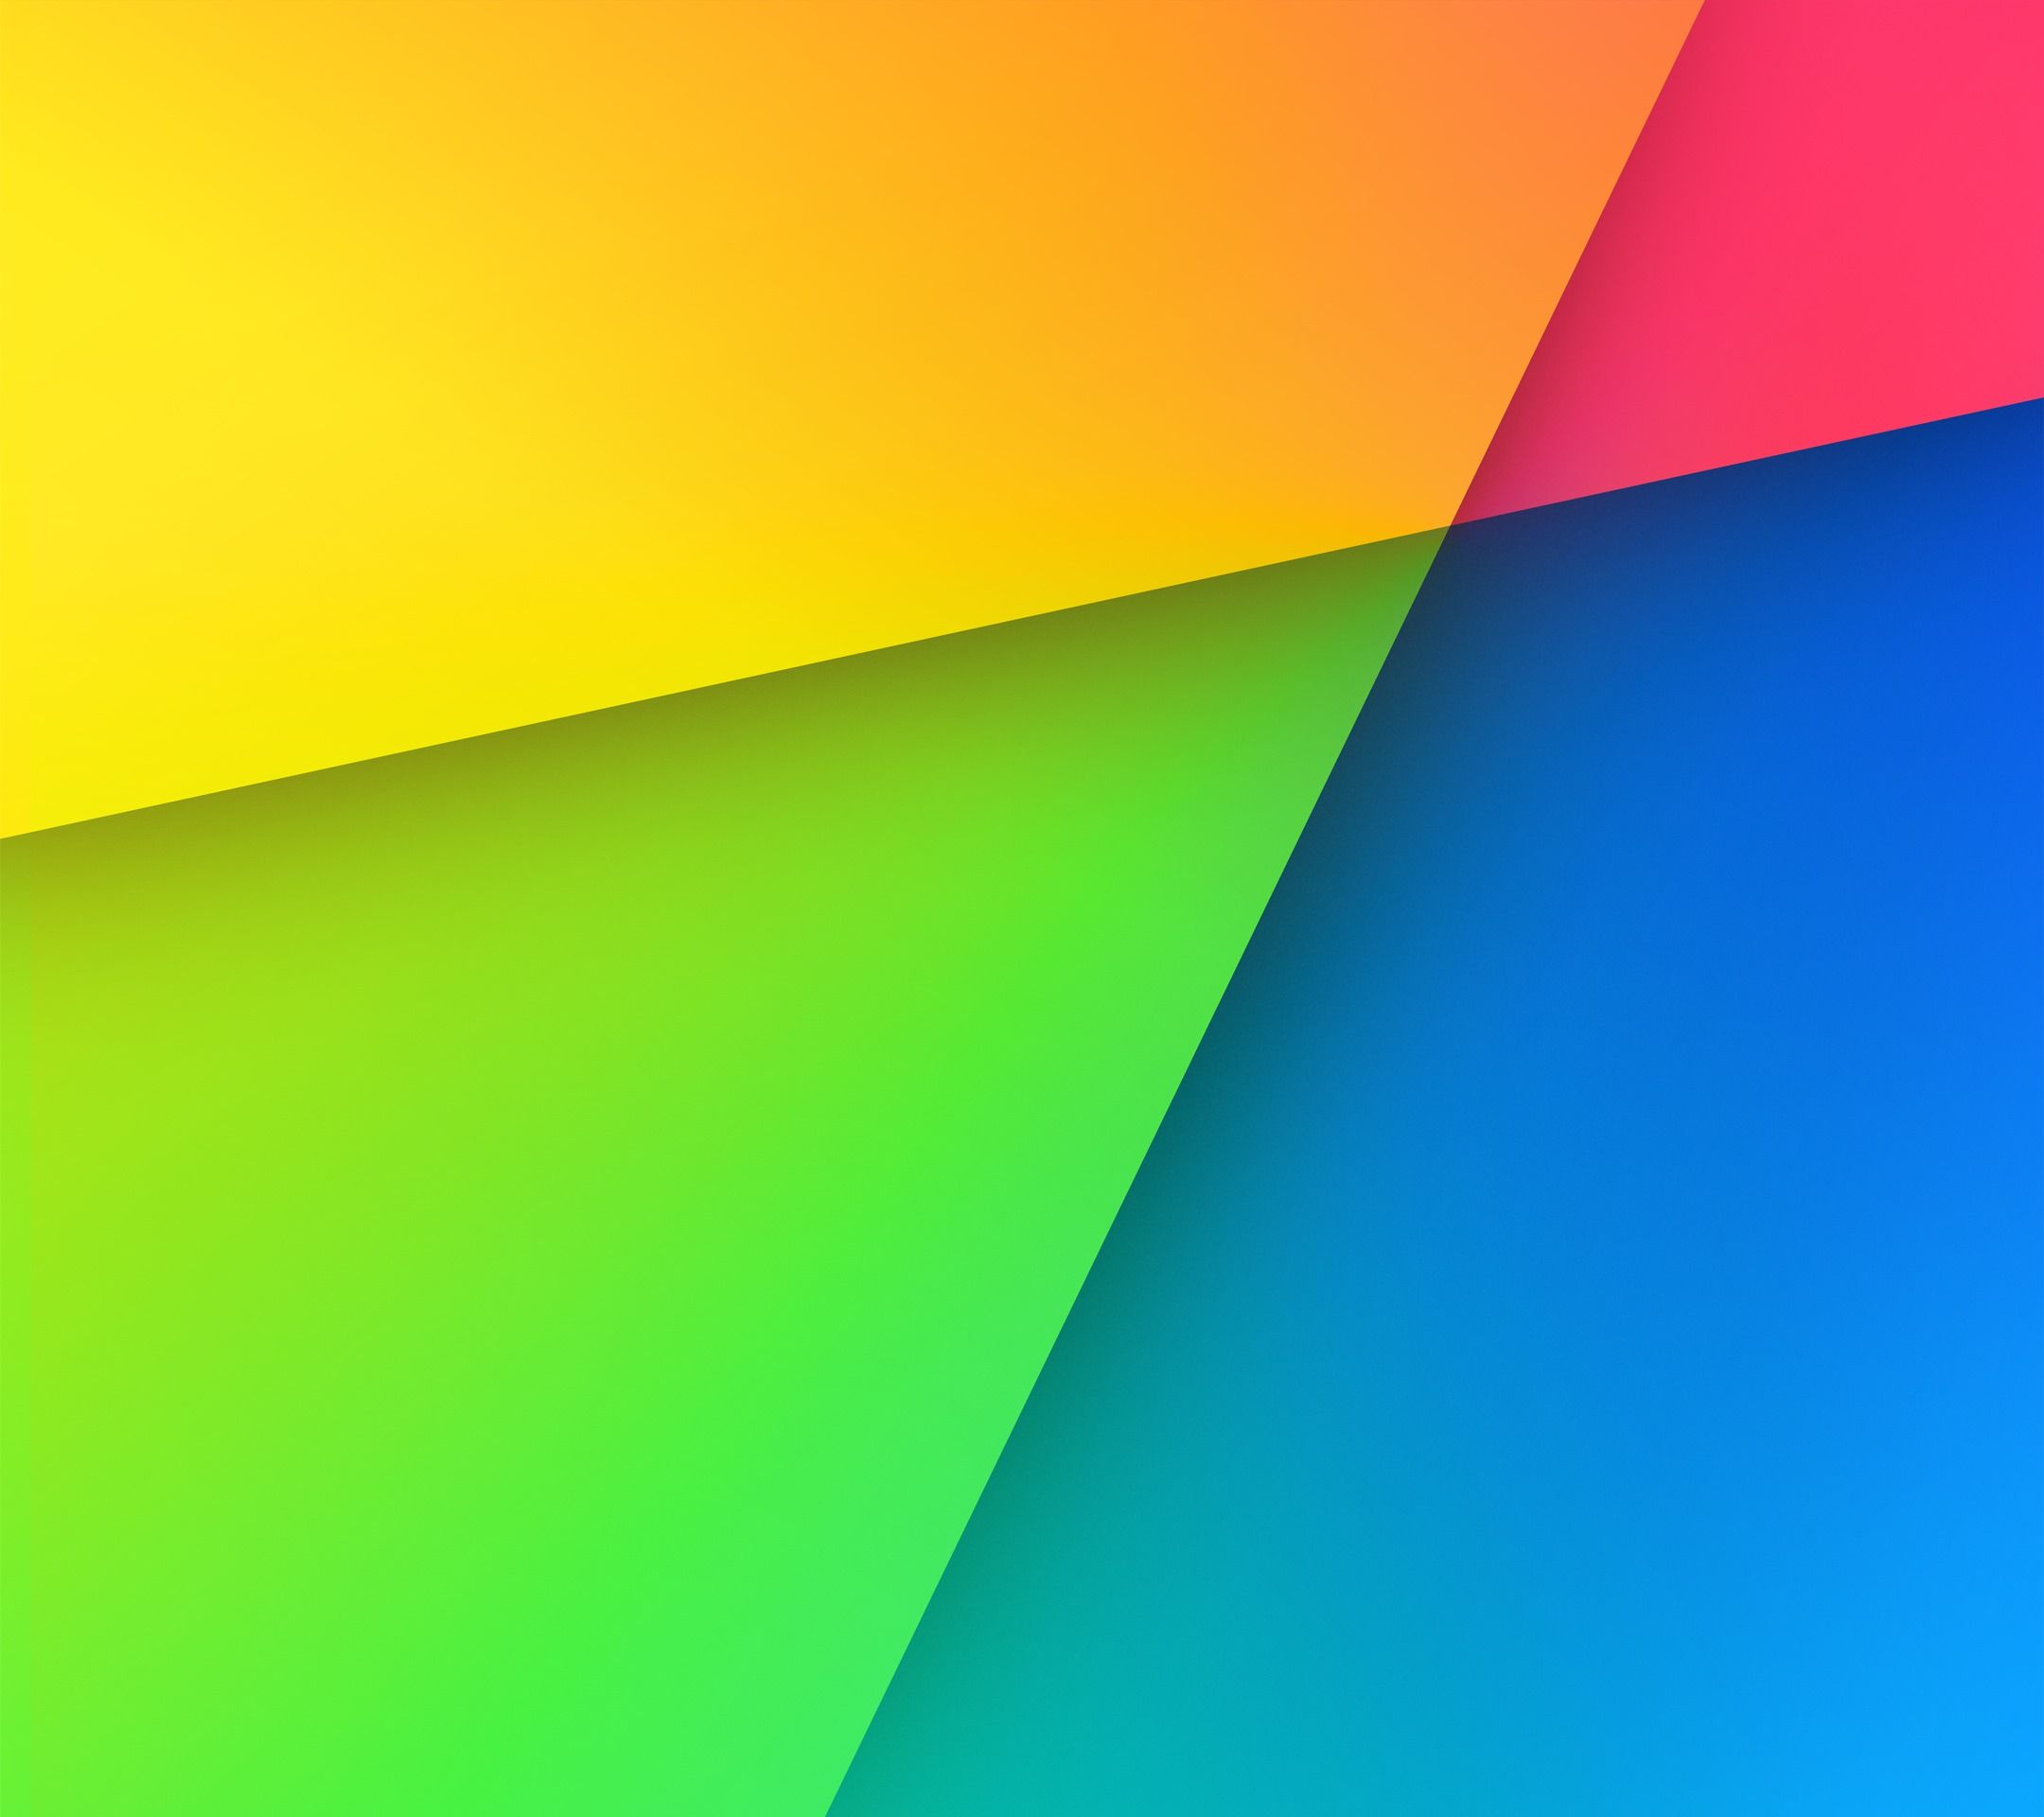 Download: Wallpapers From The New Nexus 7 [Updated]